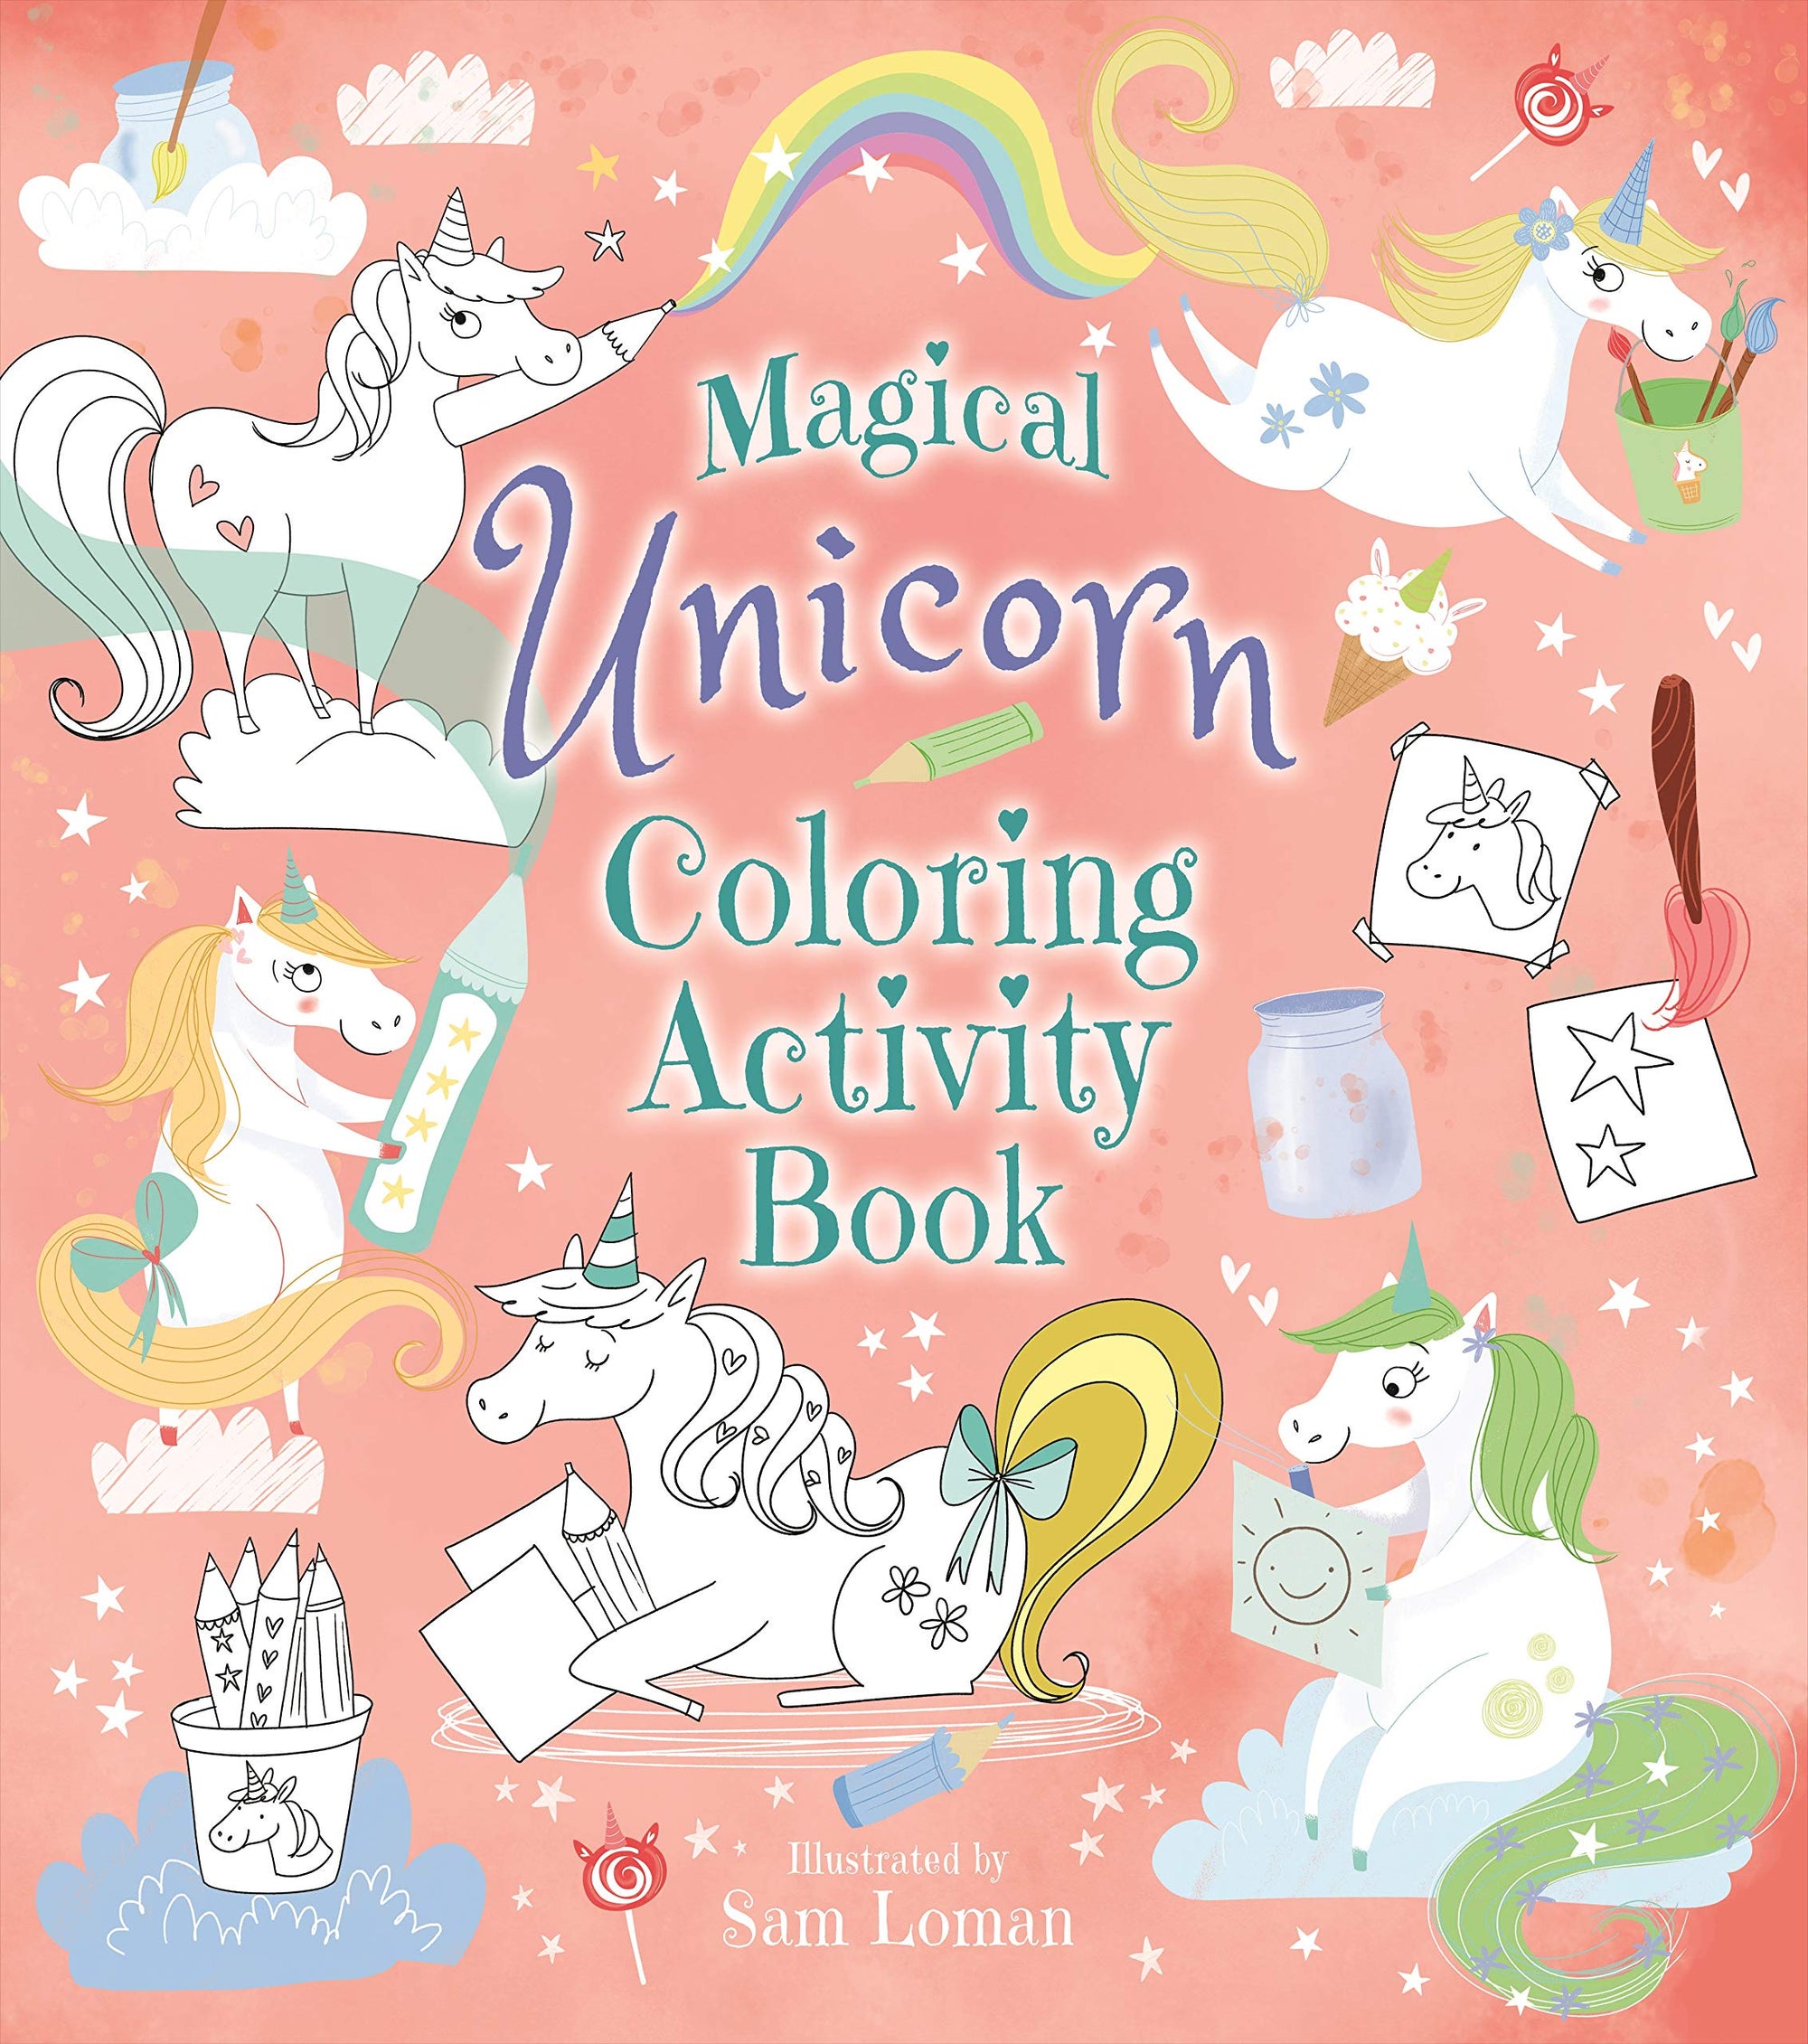 Magical Unicorn Coloring Activity Book